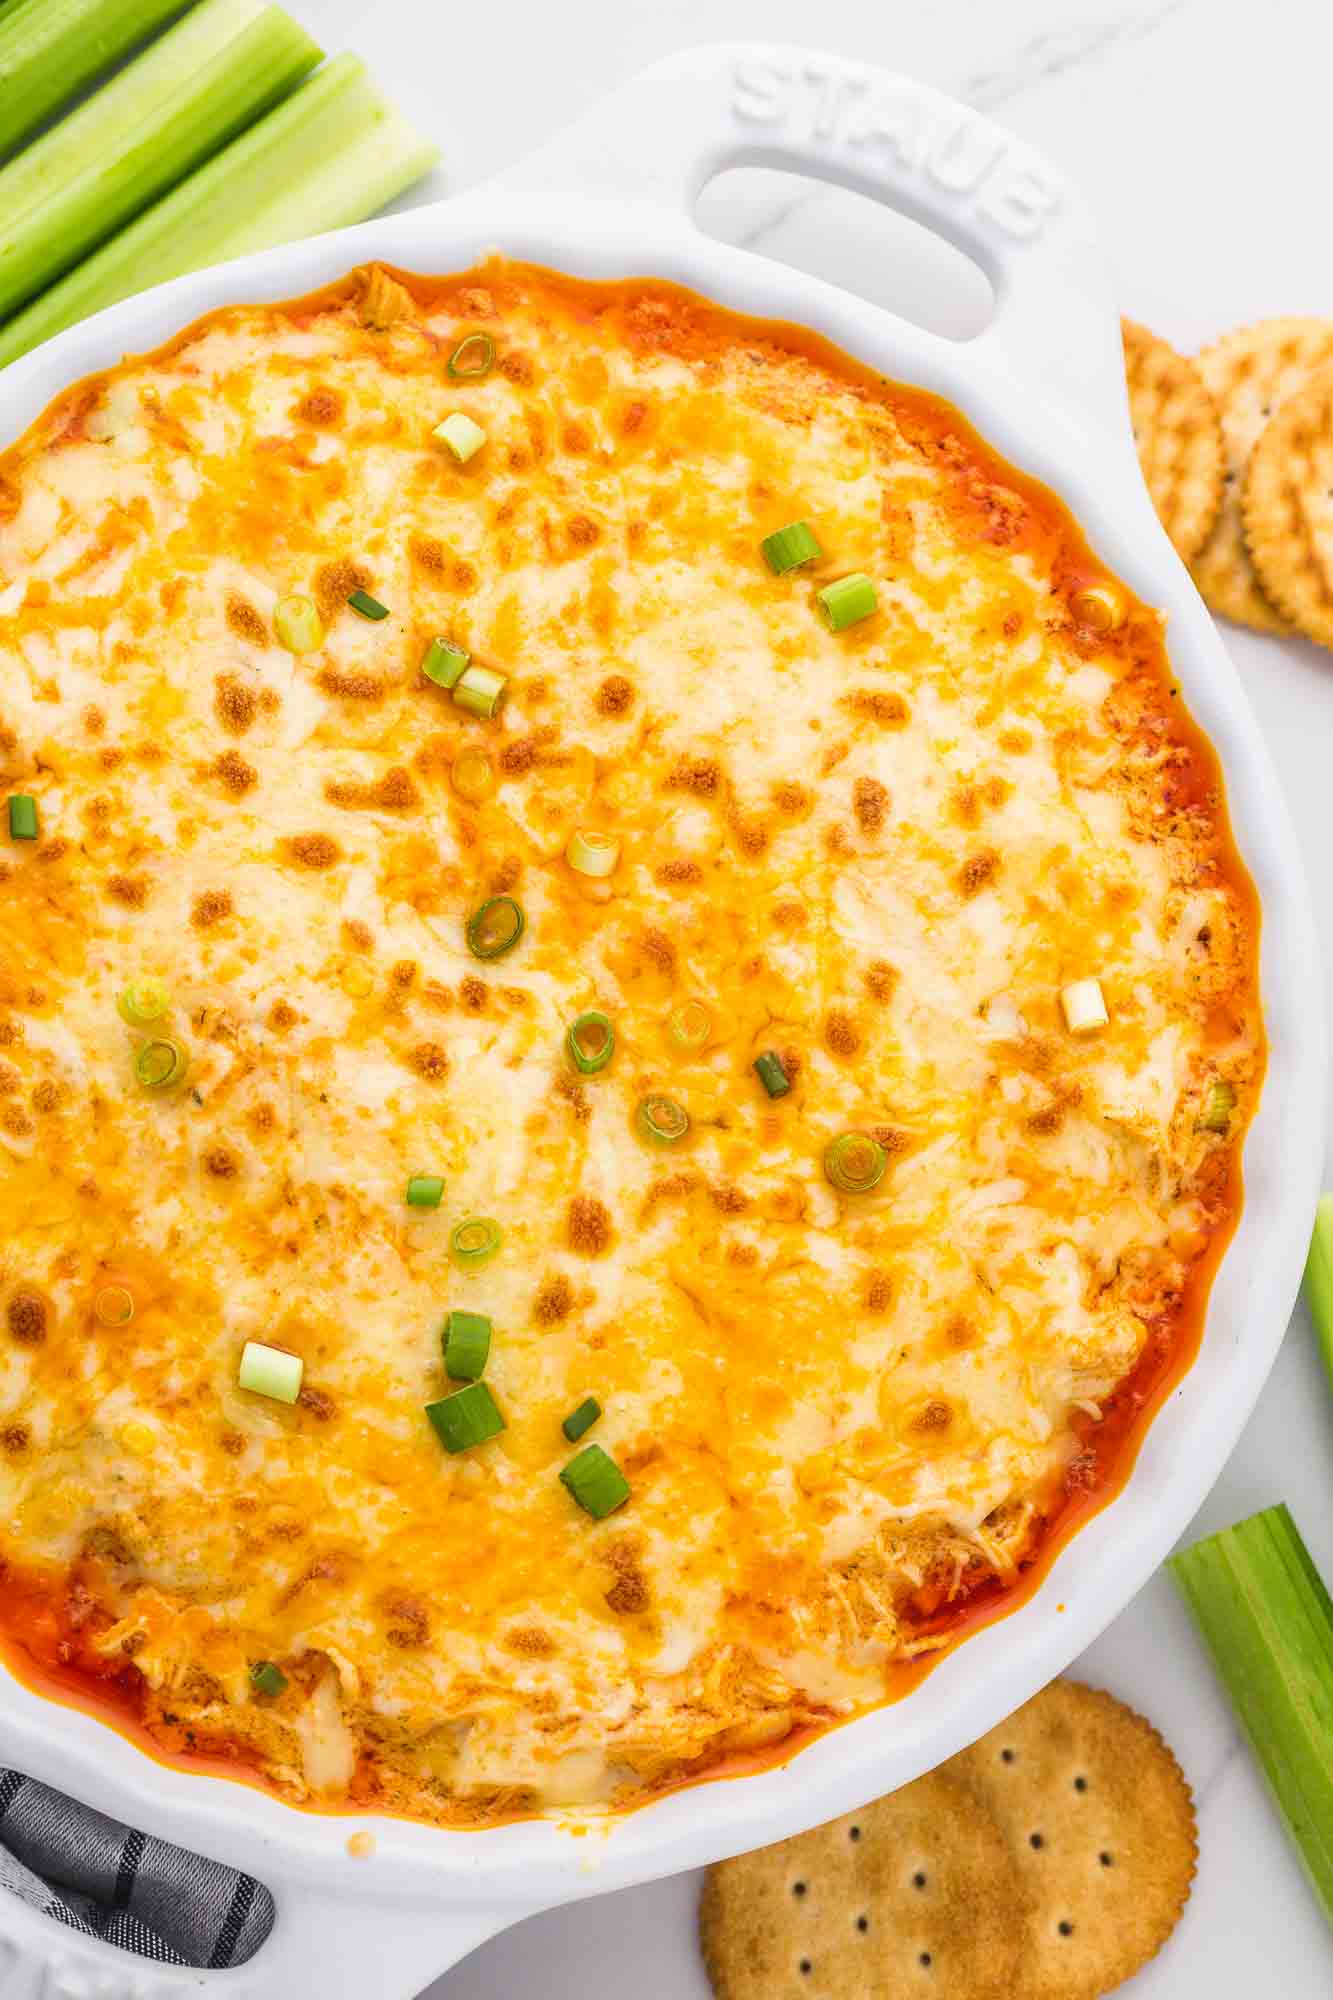 Hot buffalo chicken dip in a baking dish, with celery sticks and Ritz crackers.